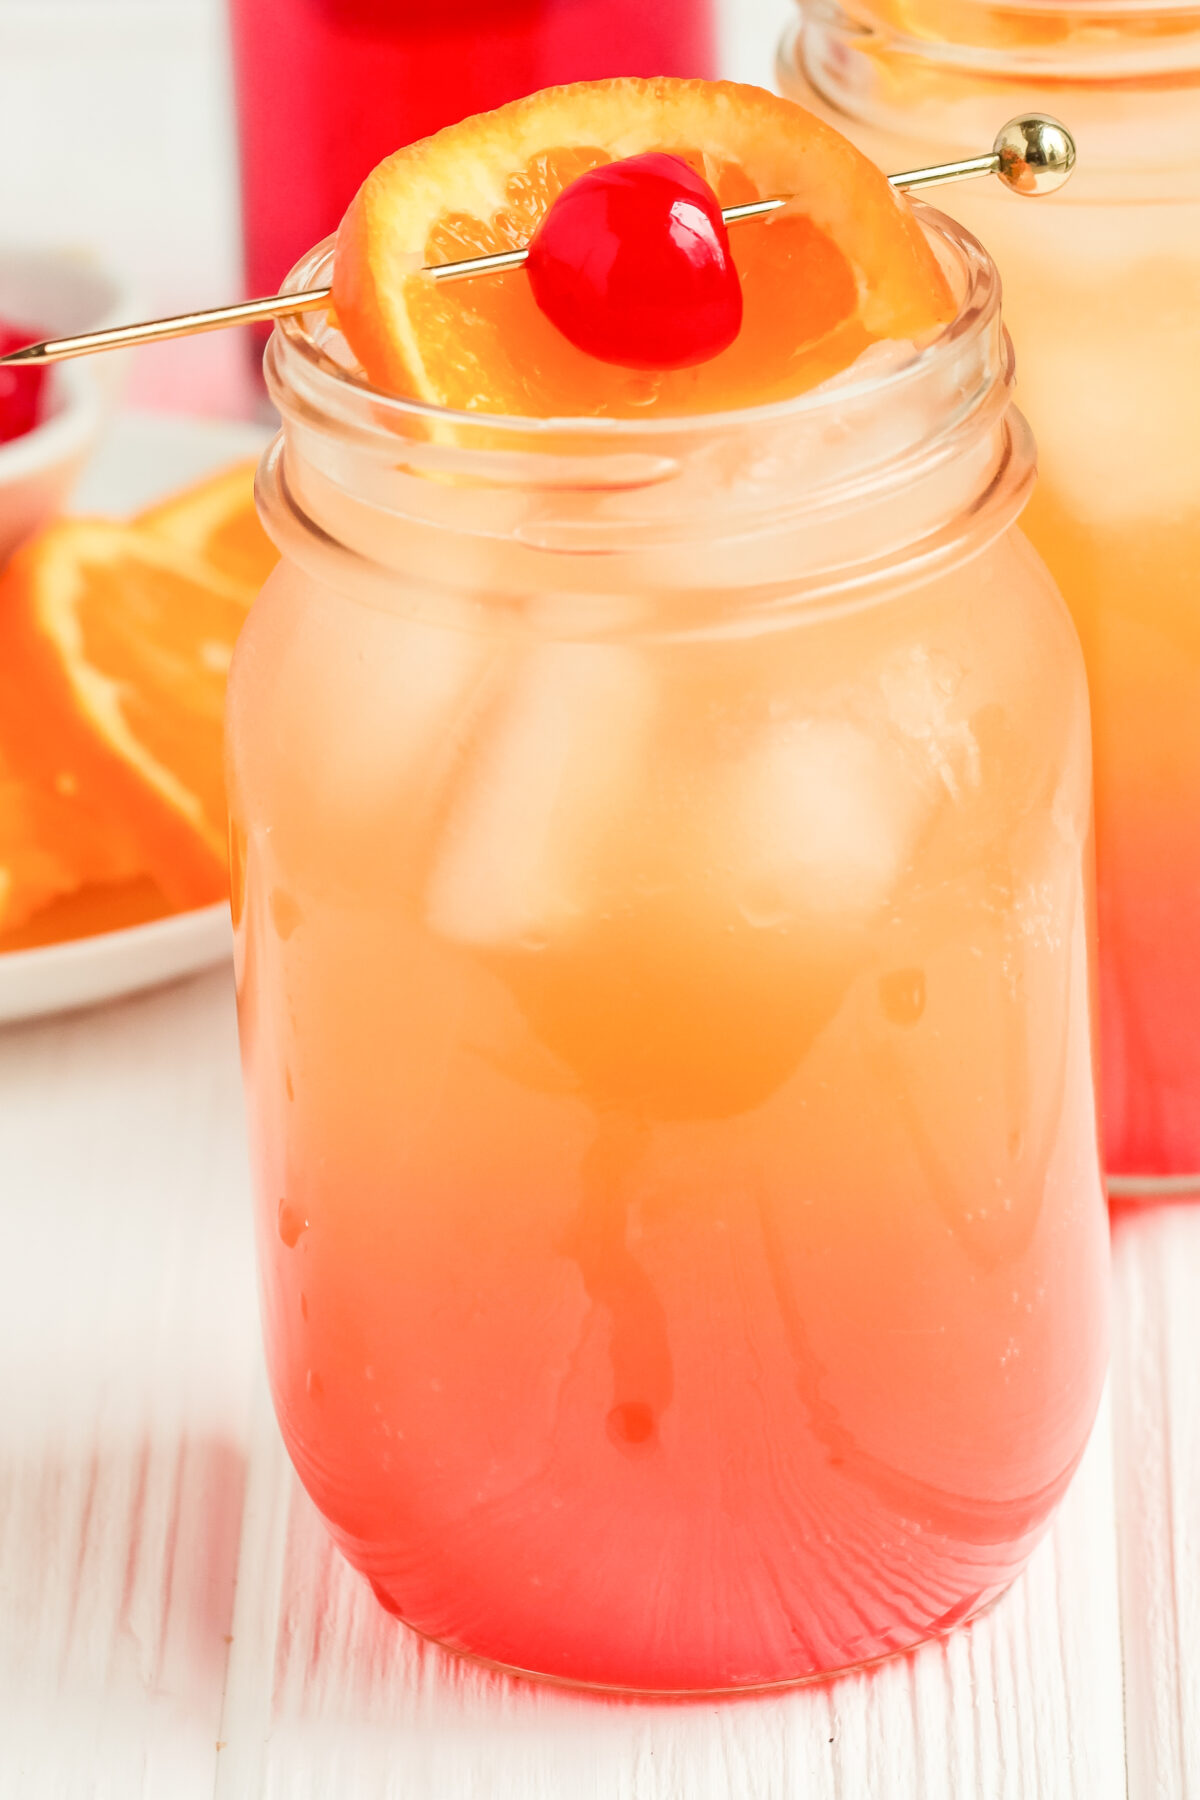 A classic Shirley Temple recipe made with lemon-lime soda, orange juice, and grenadine. Perfect fun and fancy mocktail for any party!